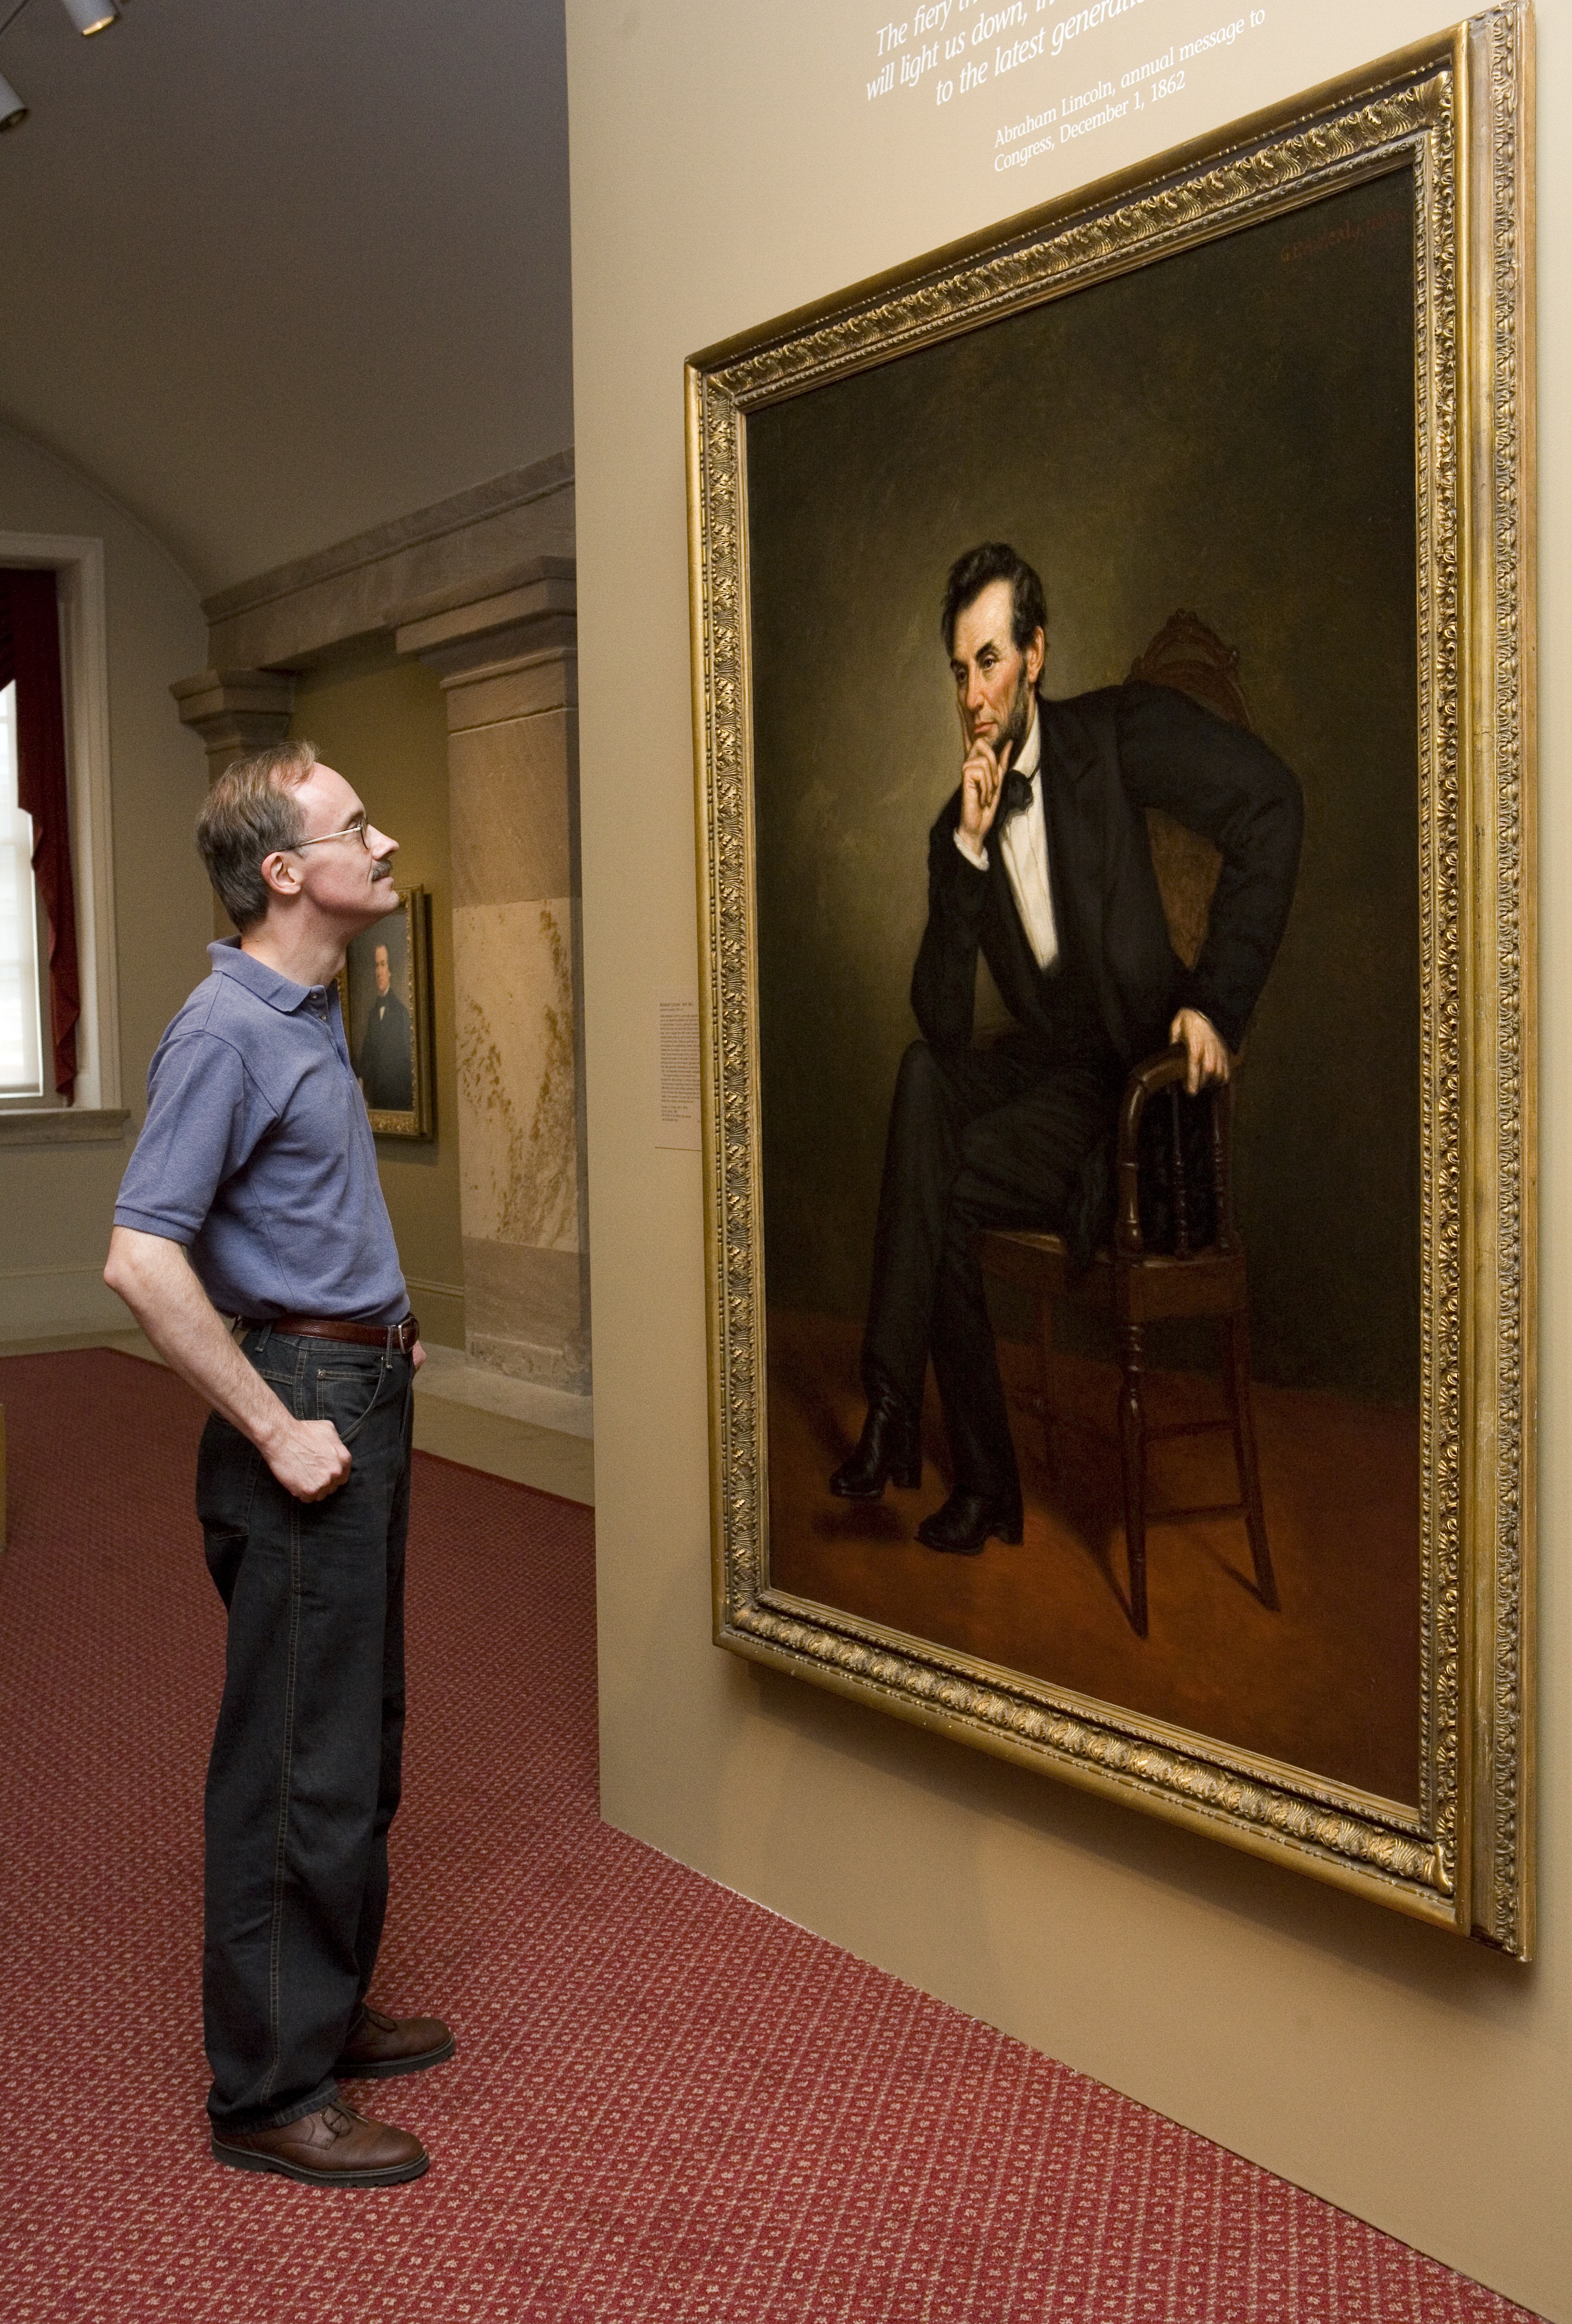 A man stands in front of a large portrait of Abraham Lincoln.